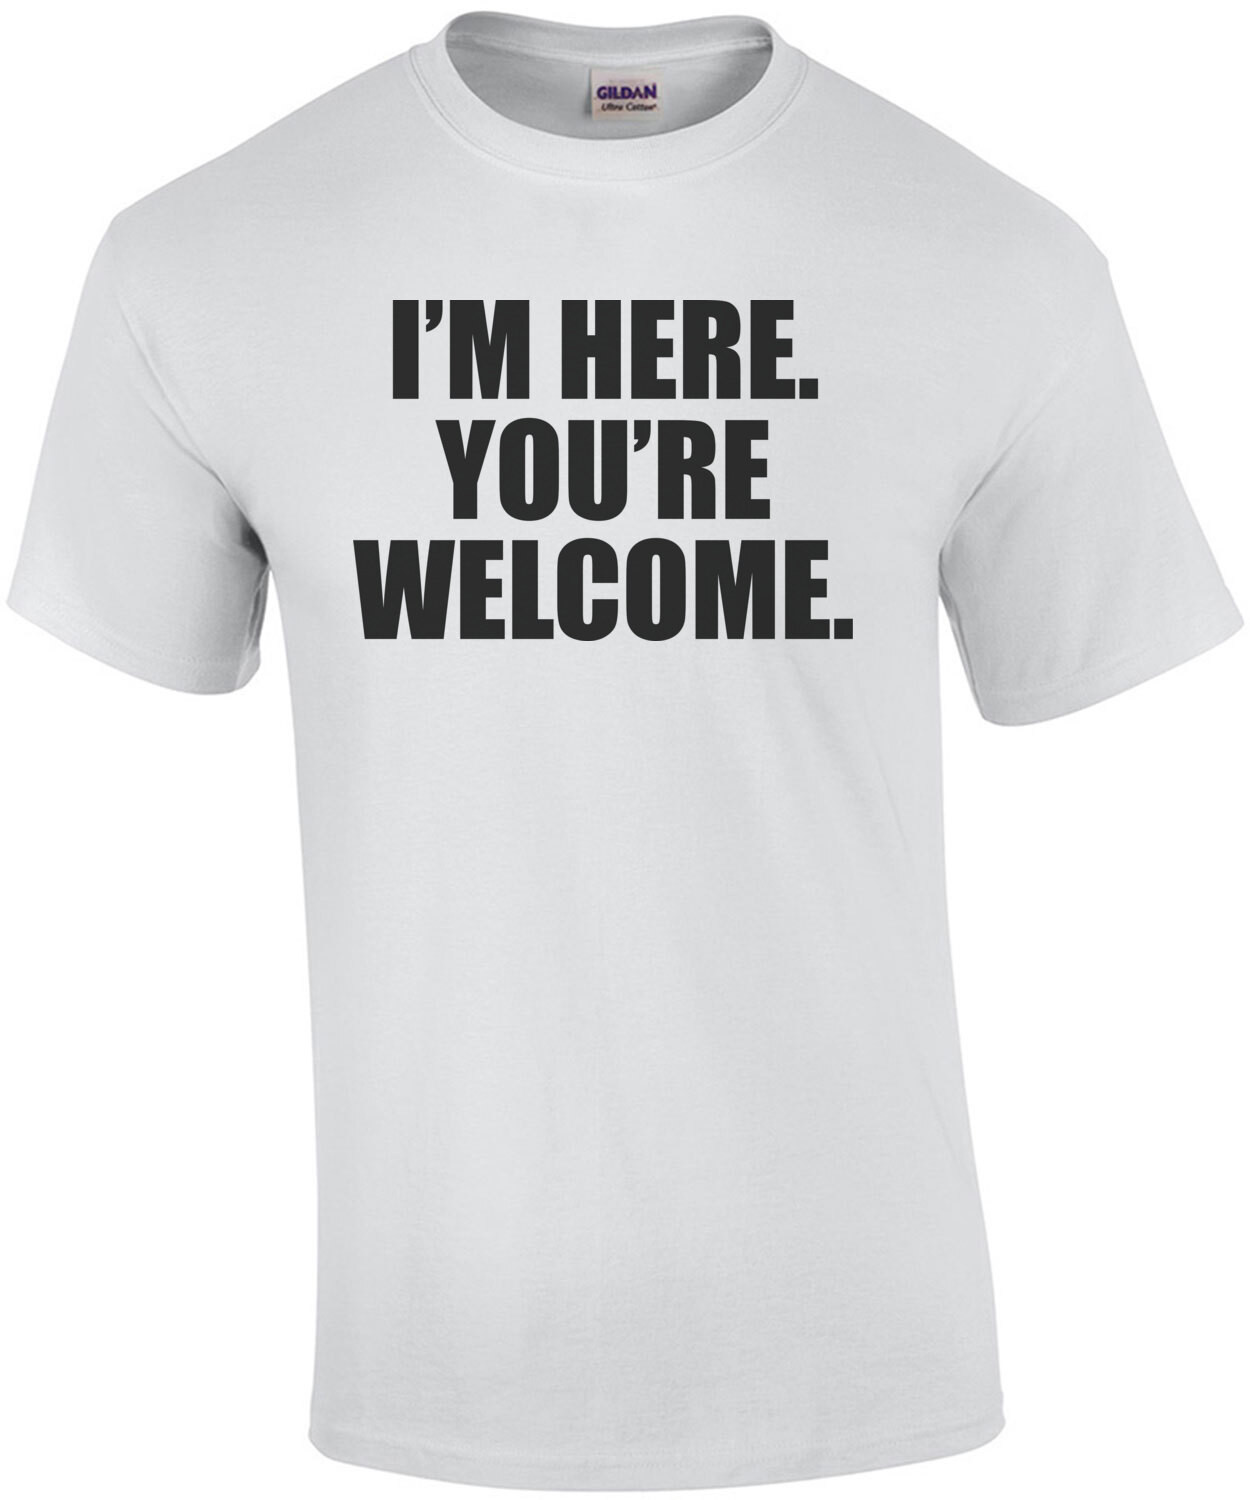 I'm here. You're Welcome. Funny sarcastic t-shirt